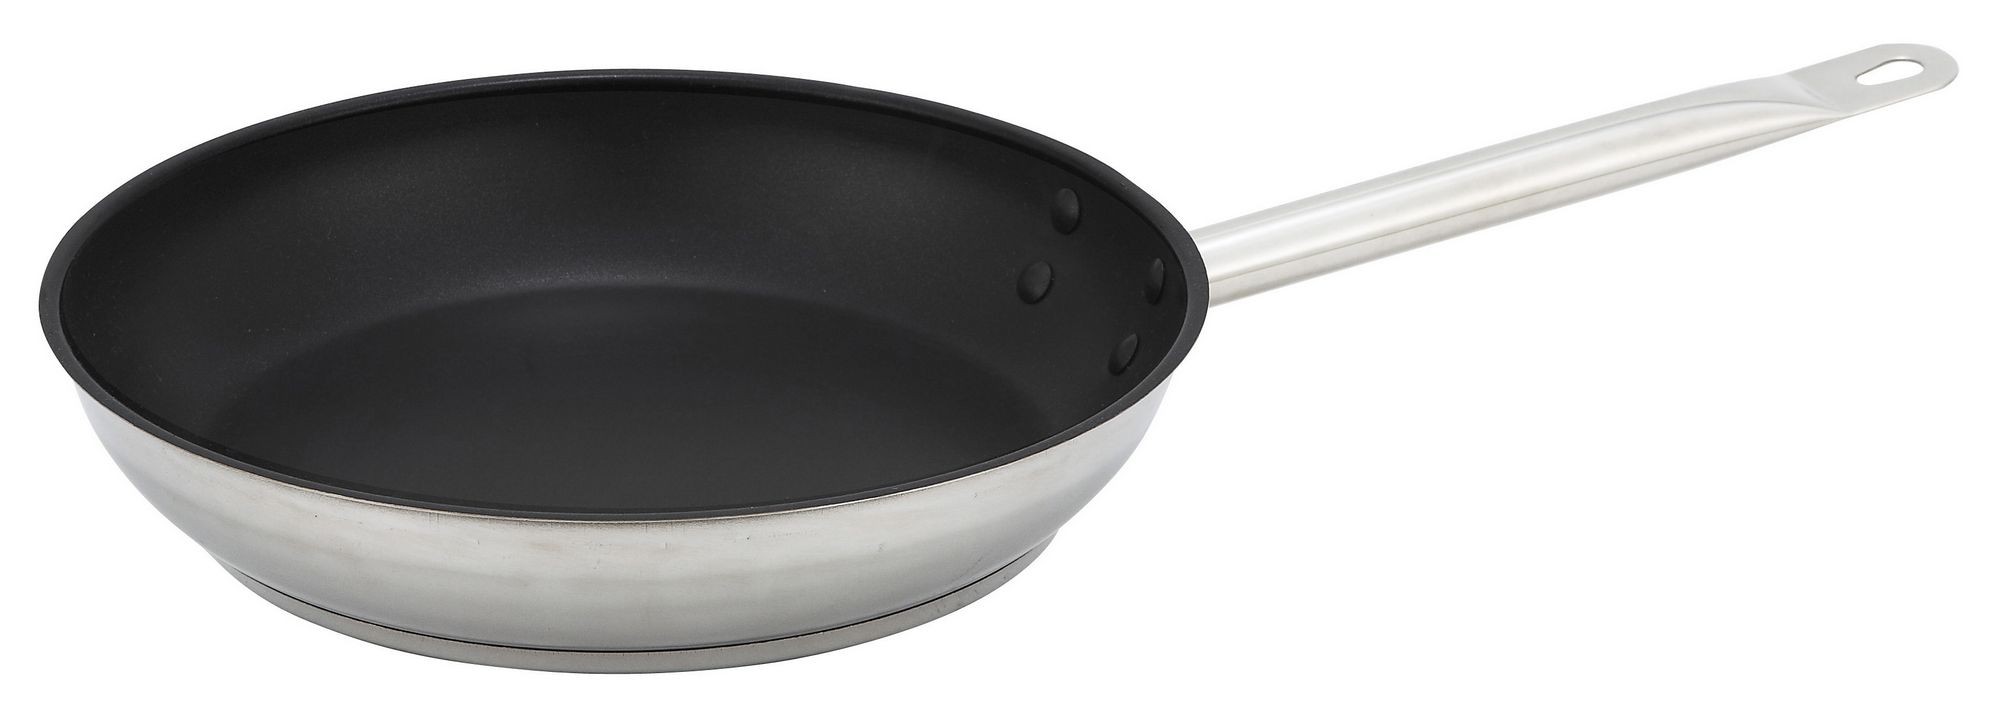 Winco SSFP-9NS Non-Stick Stainless Steel Induction Fry Pan 9"